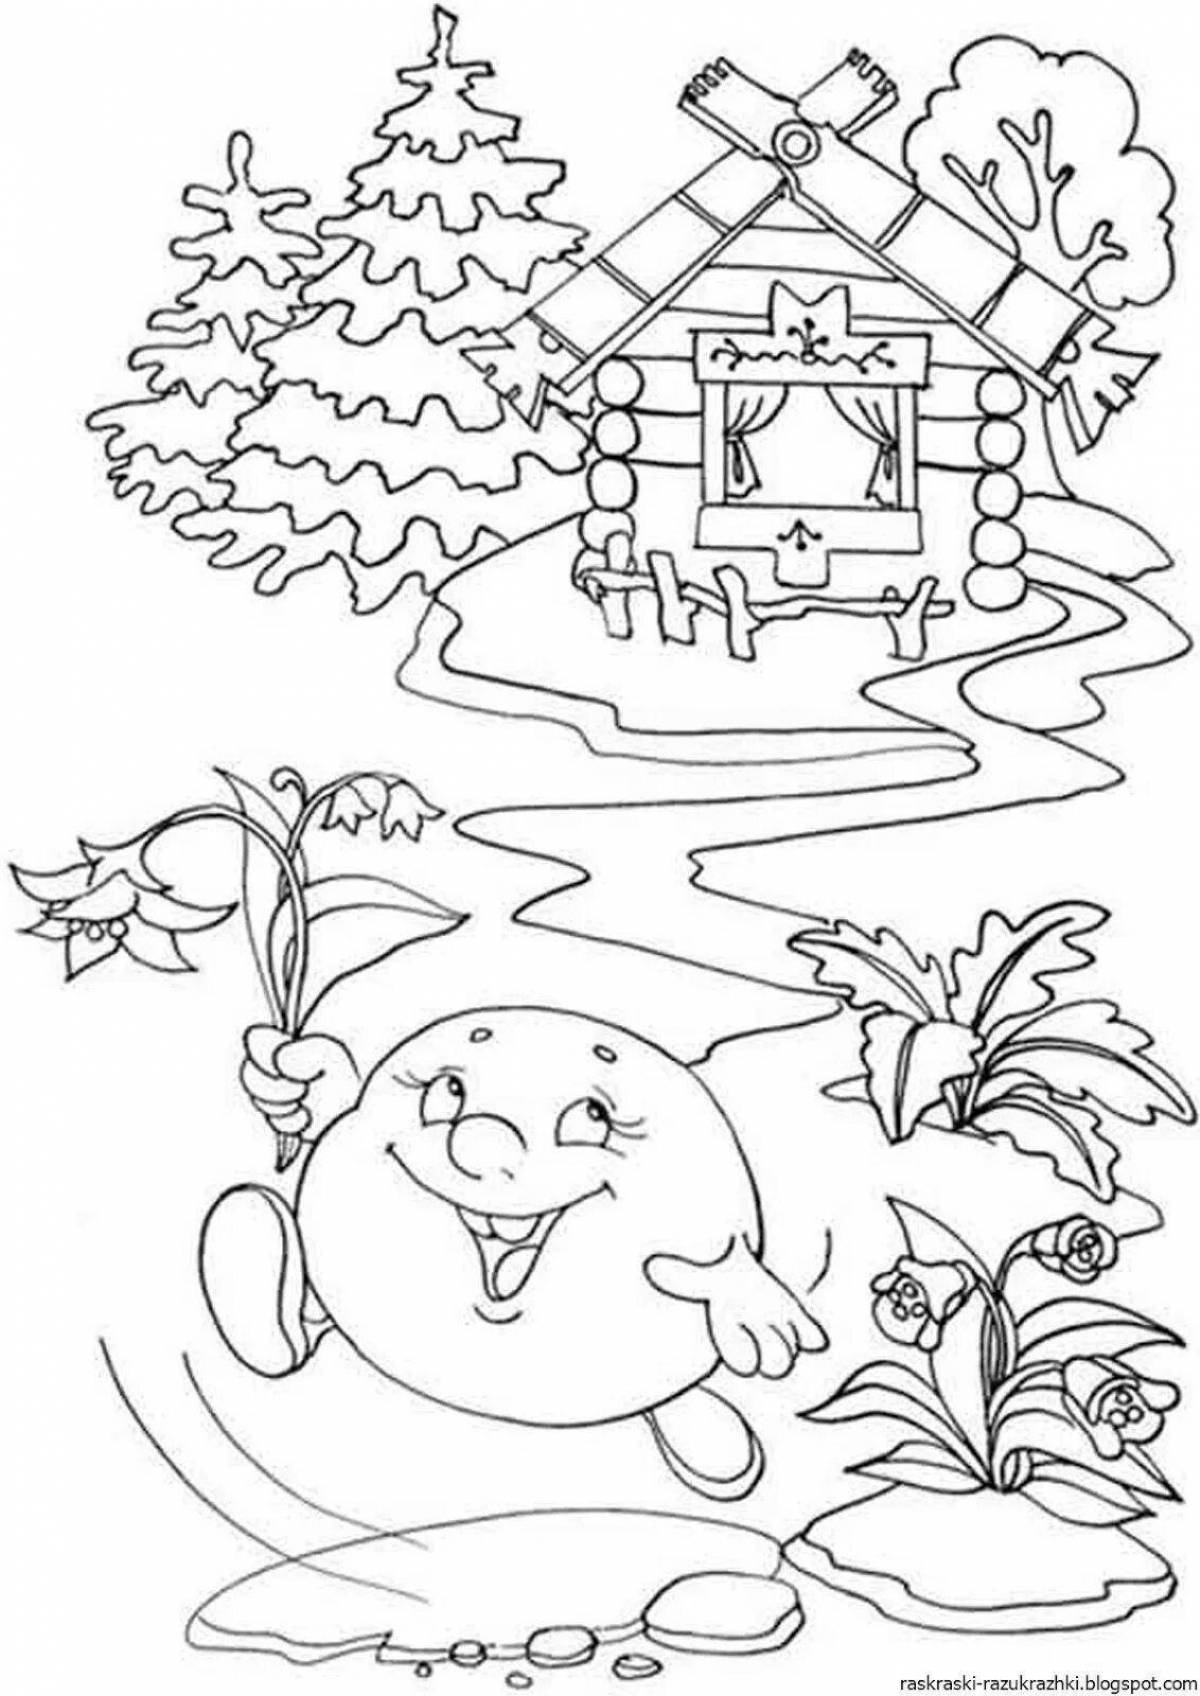 Radiant coloring book based on Russian folk tales for preschoolers